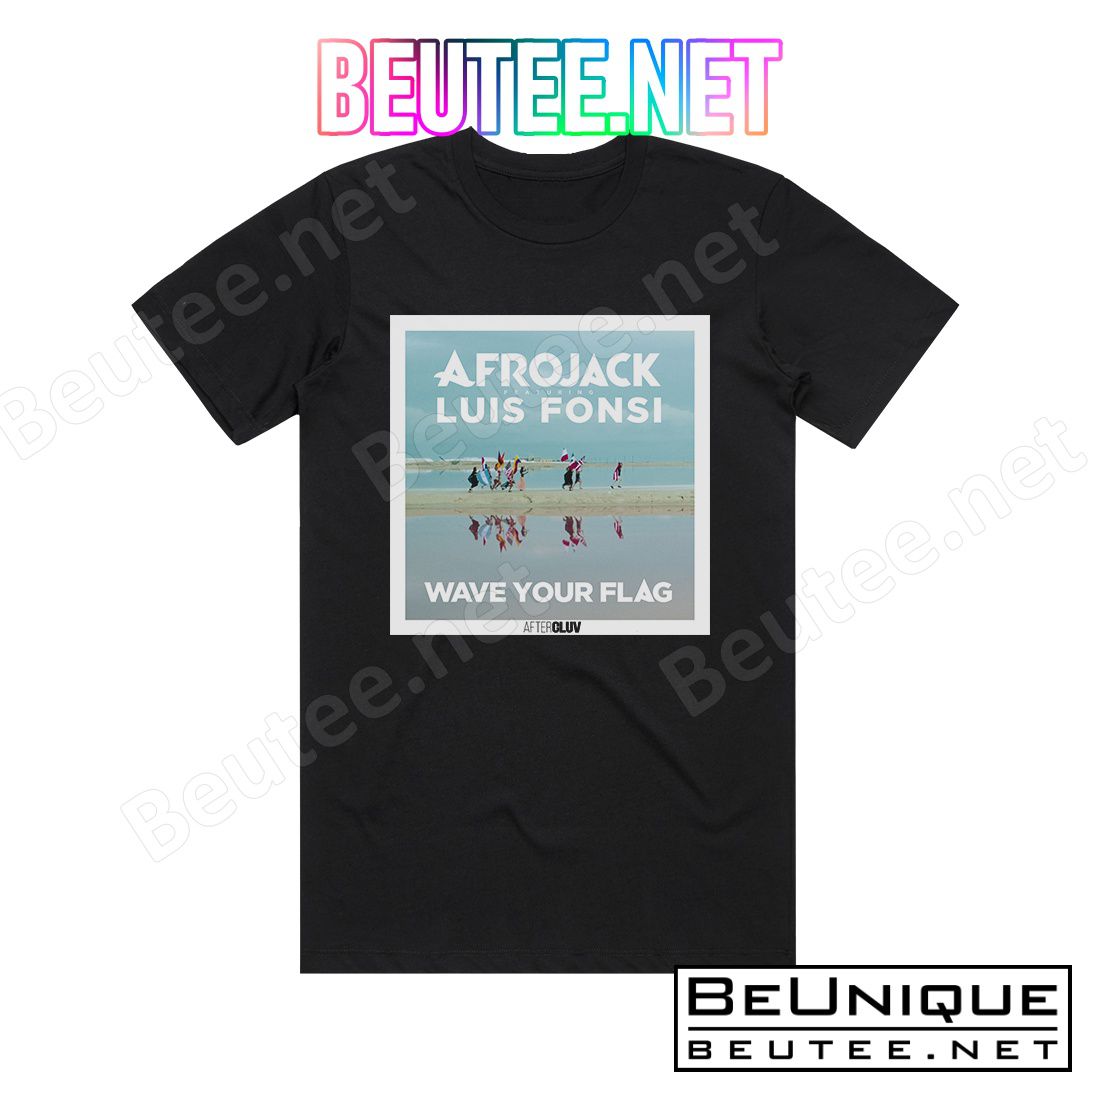 Afrojack Wave Your Flag Album Cover T-shirt